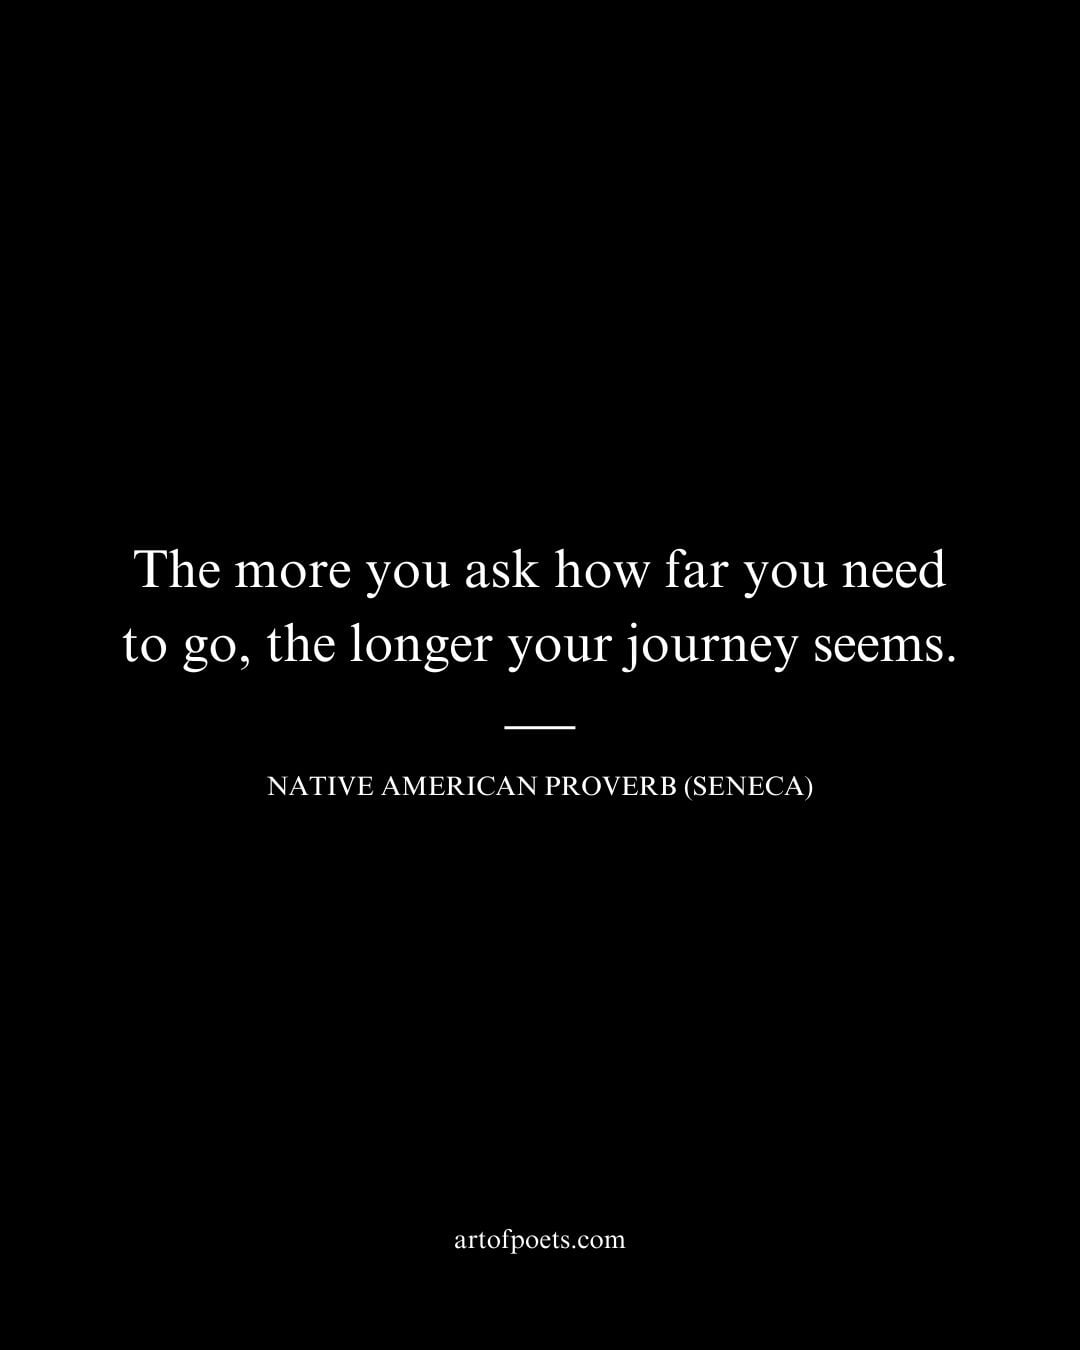 The more you ask how far you need to go the longer your journey seems